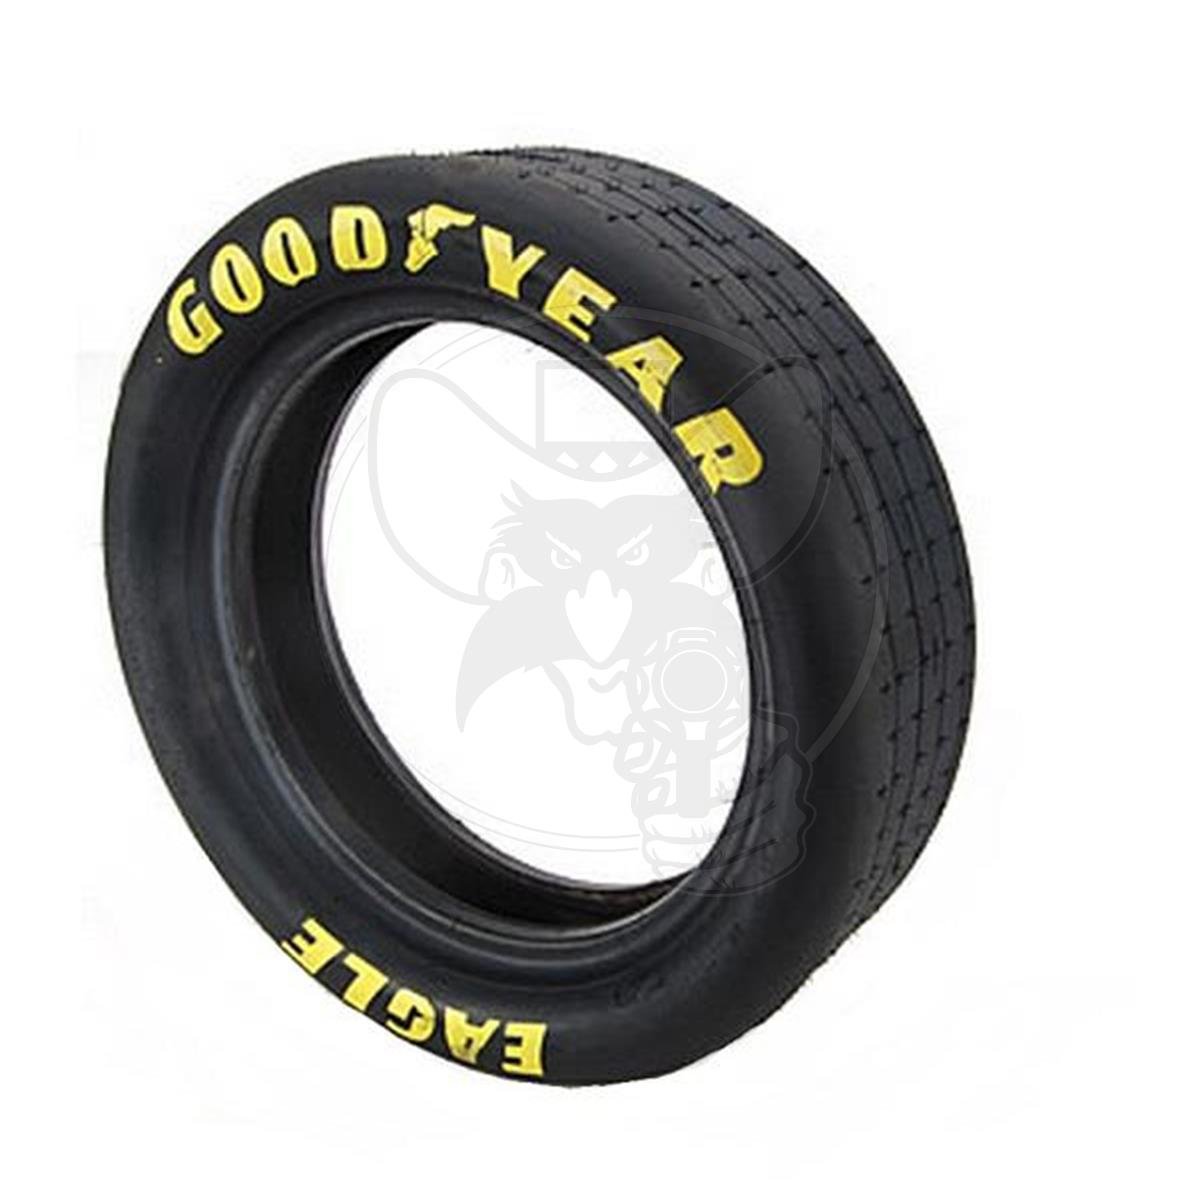 GOODYEAR 24 X 5.0 X 15 FRONT TYRE